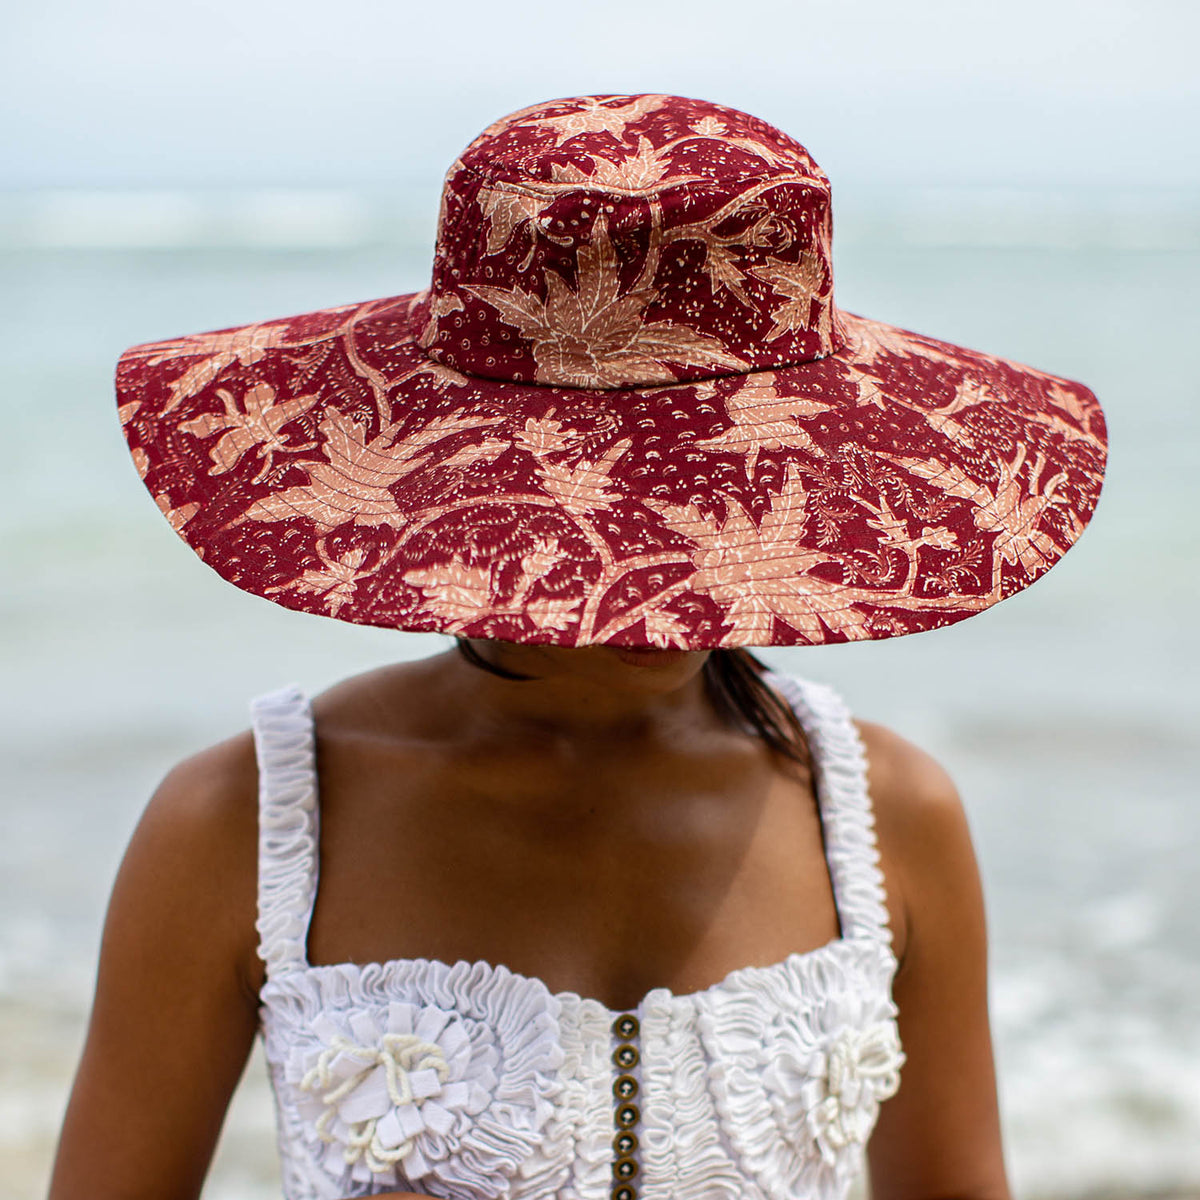 Sustainable Handpainted Javanese Batik Floral Wide-brim Hat For Beach, Pool, and Vacation In Maroon Red and Pink